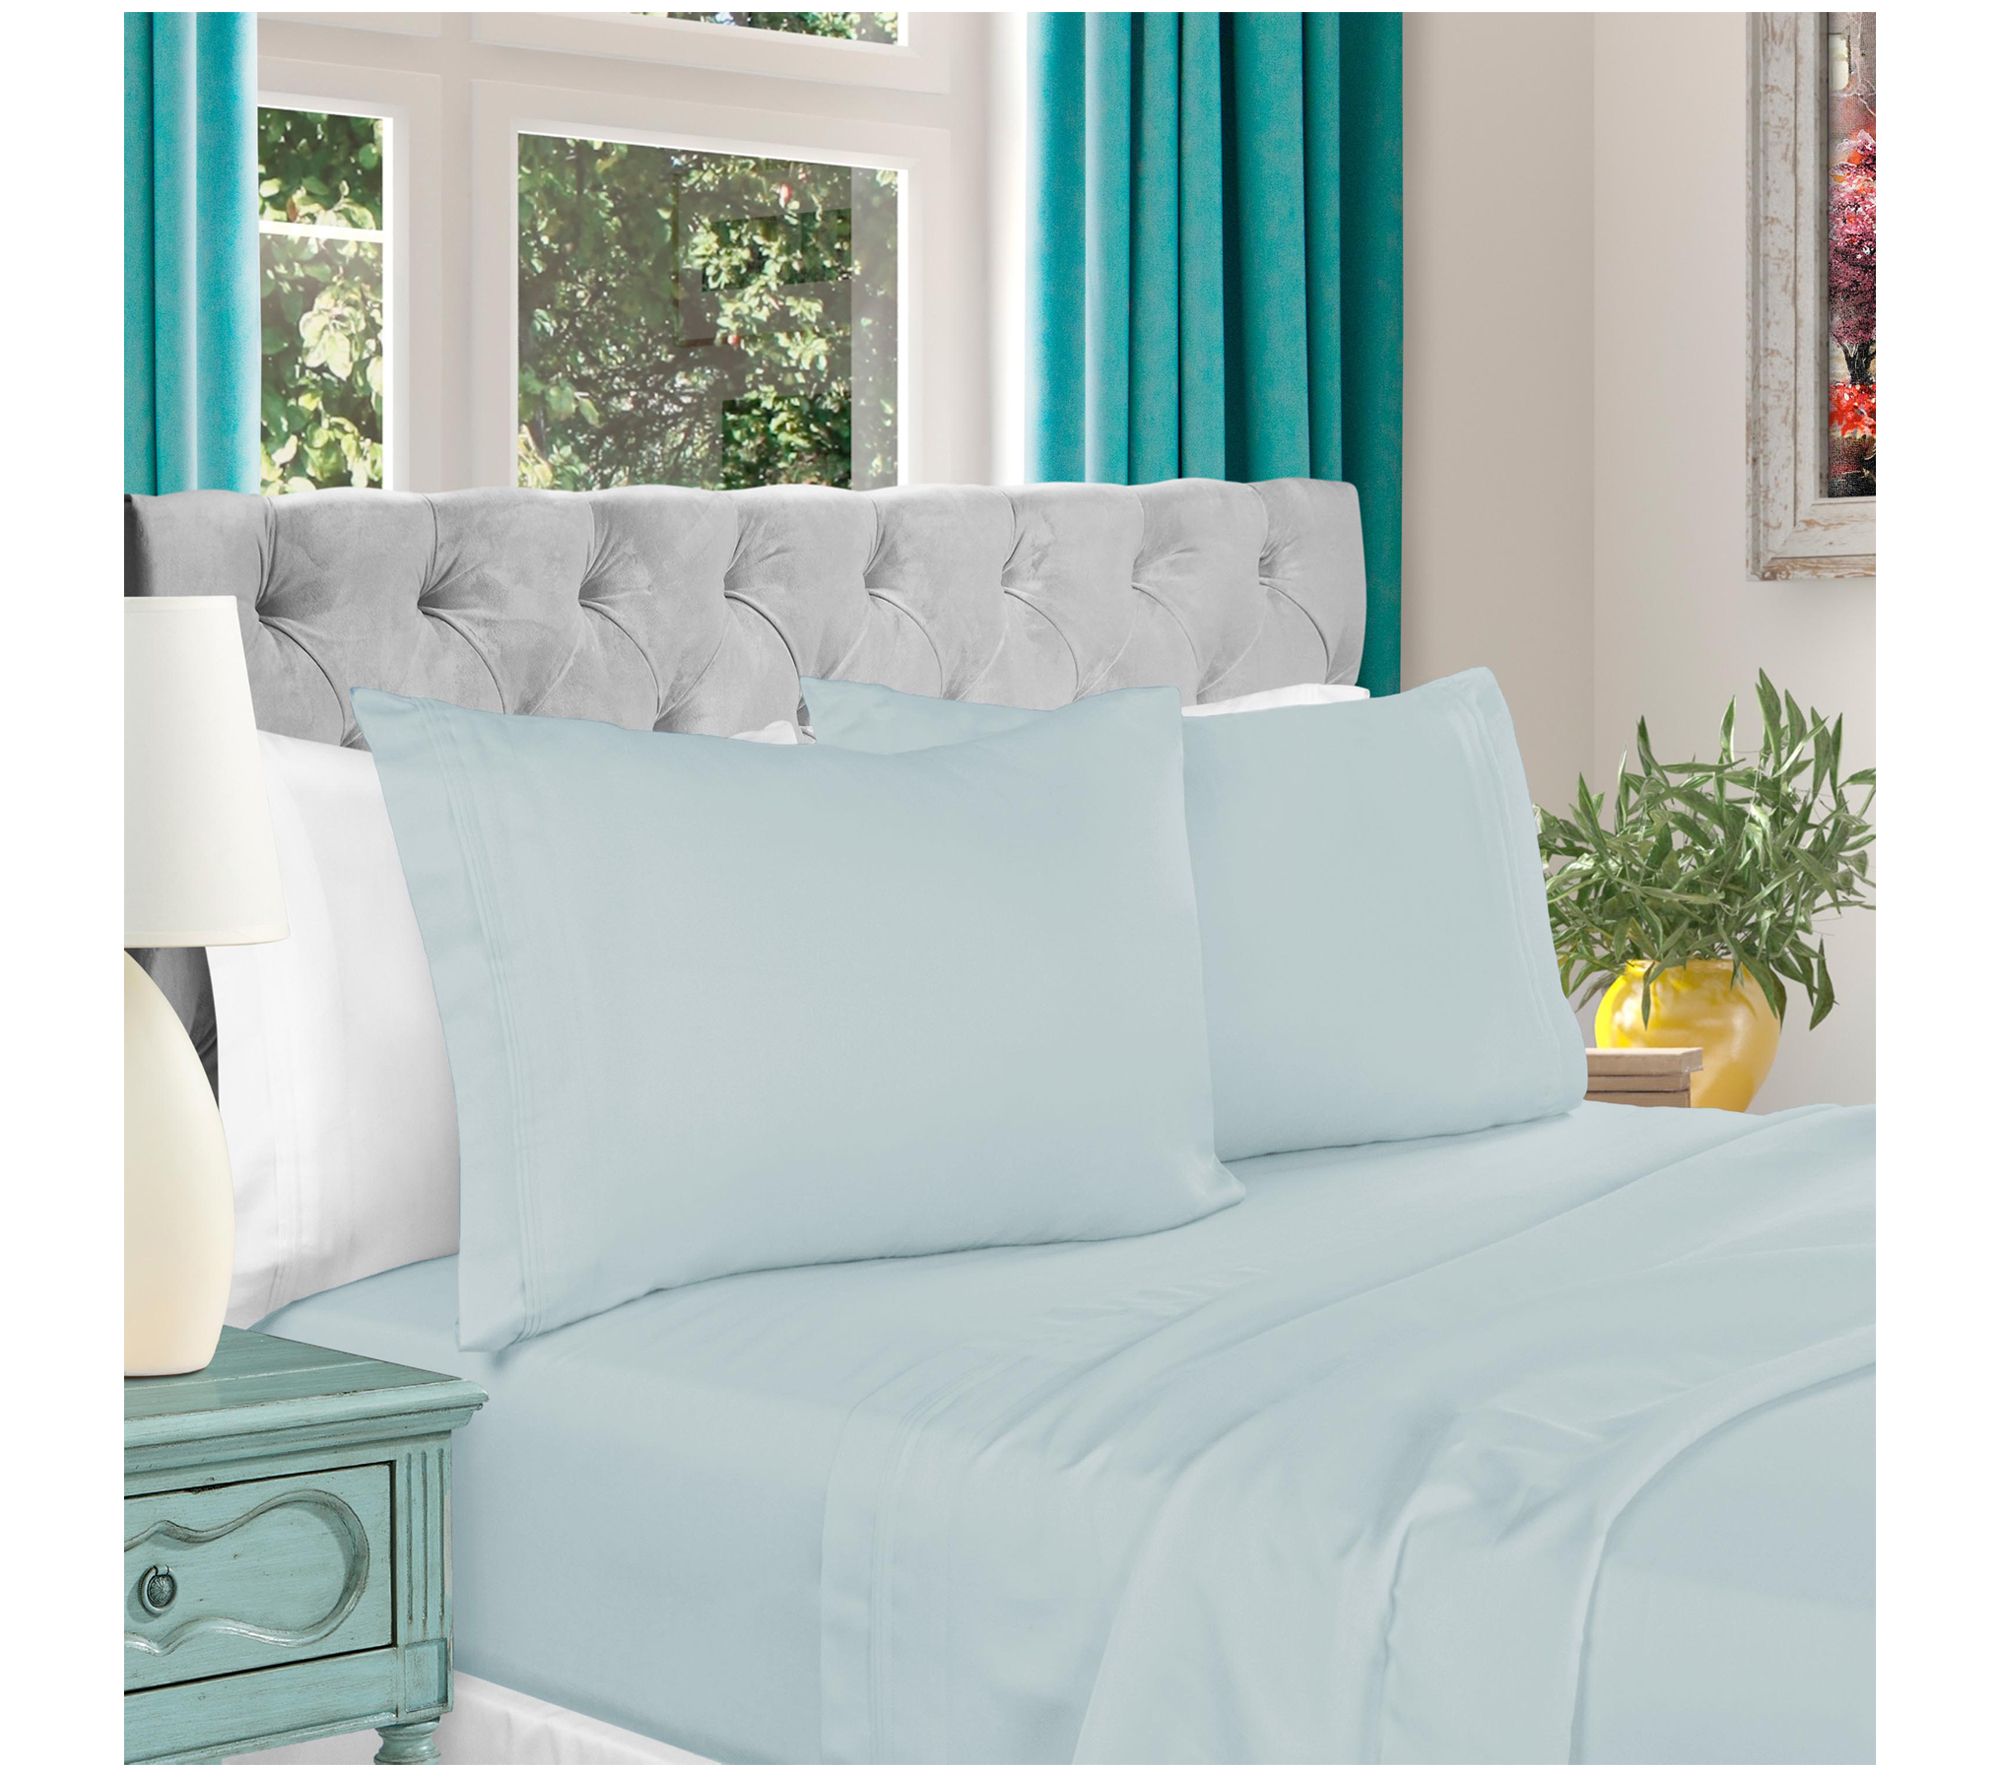 Complete Bedding Set Blue Solid Choose Sizes 1000 Thread Count Egyptian Cotton 